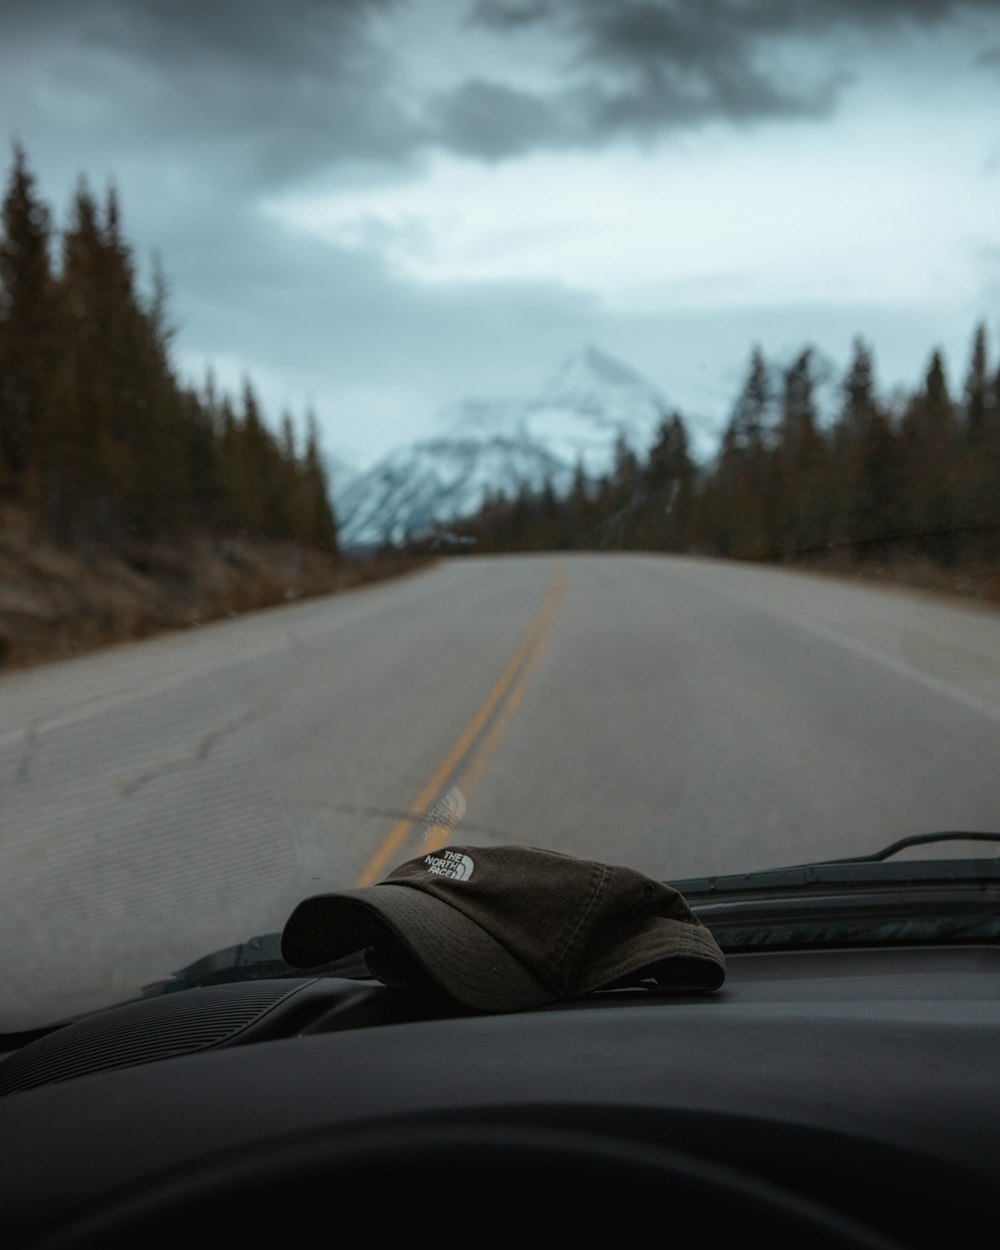 a view from a car of a road with trees and mountains in the background